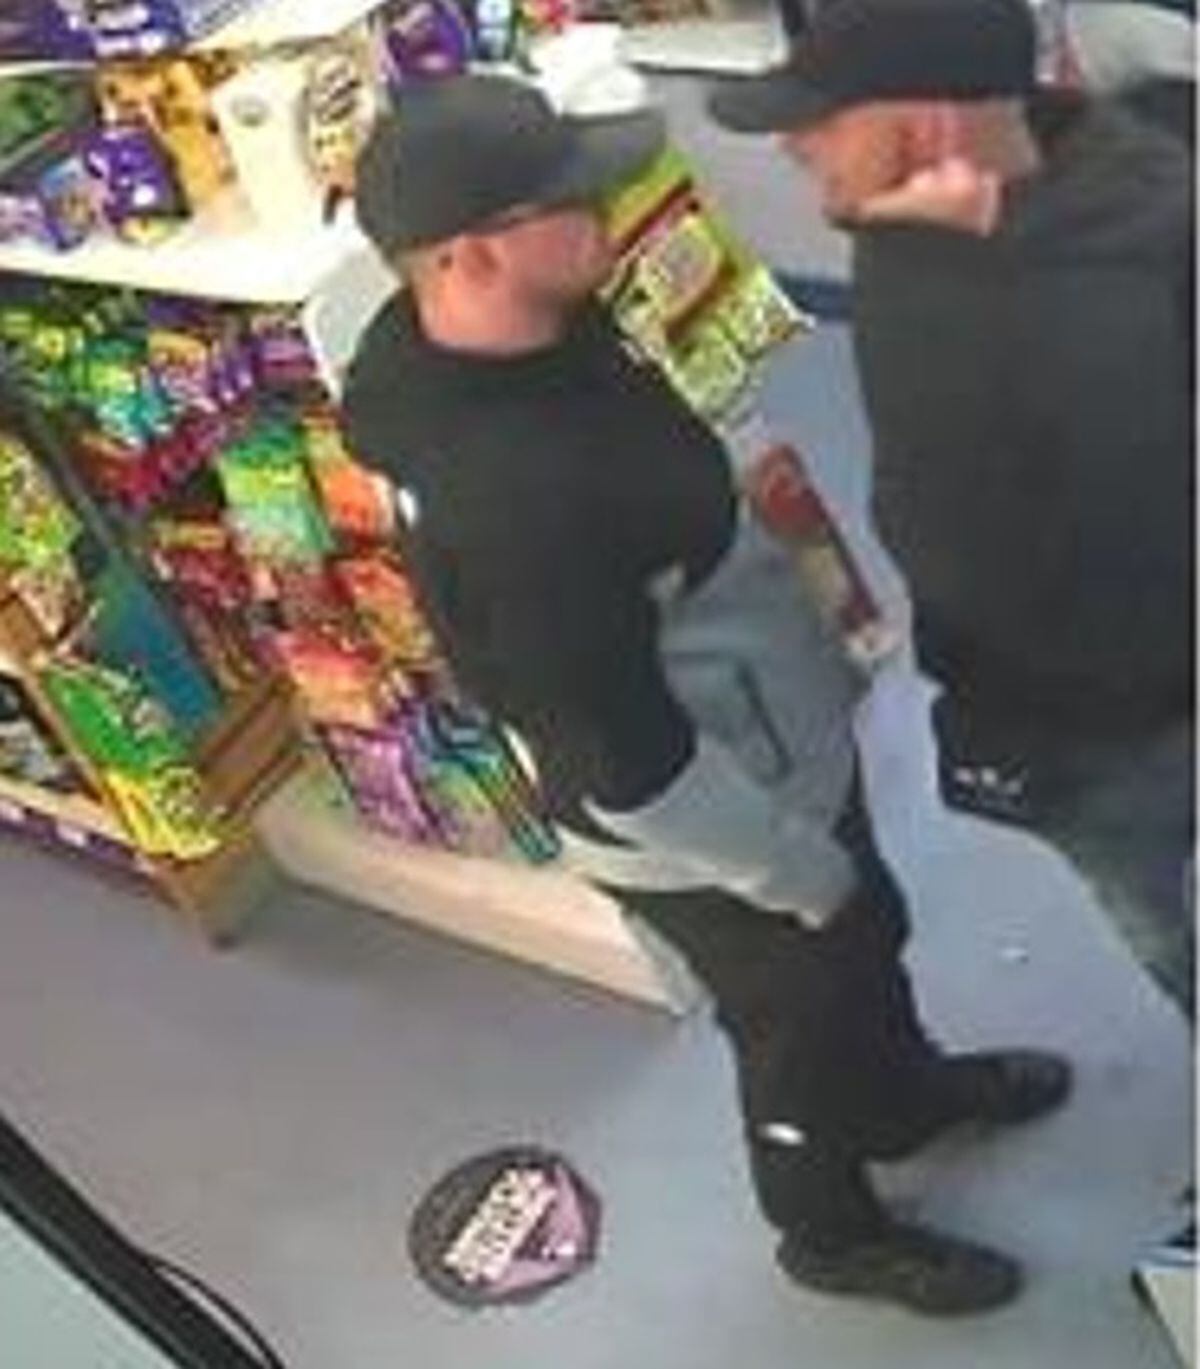 CCTV of them at the shop